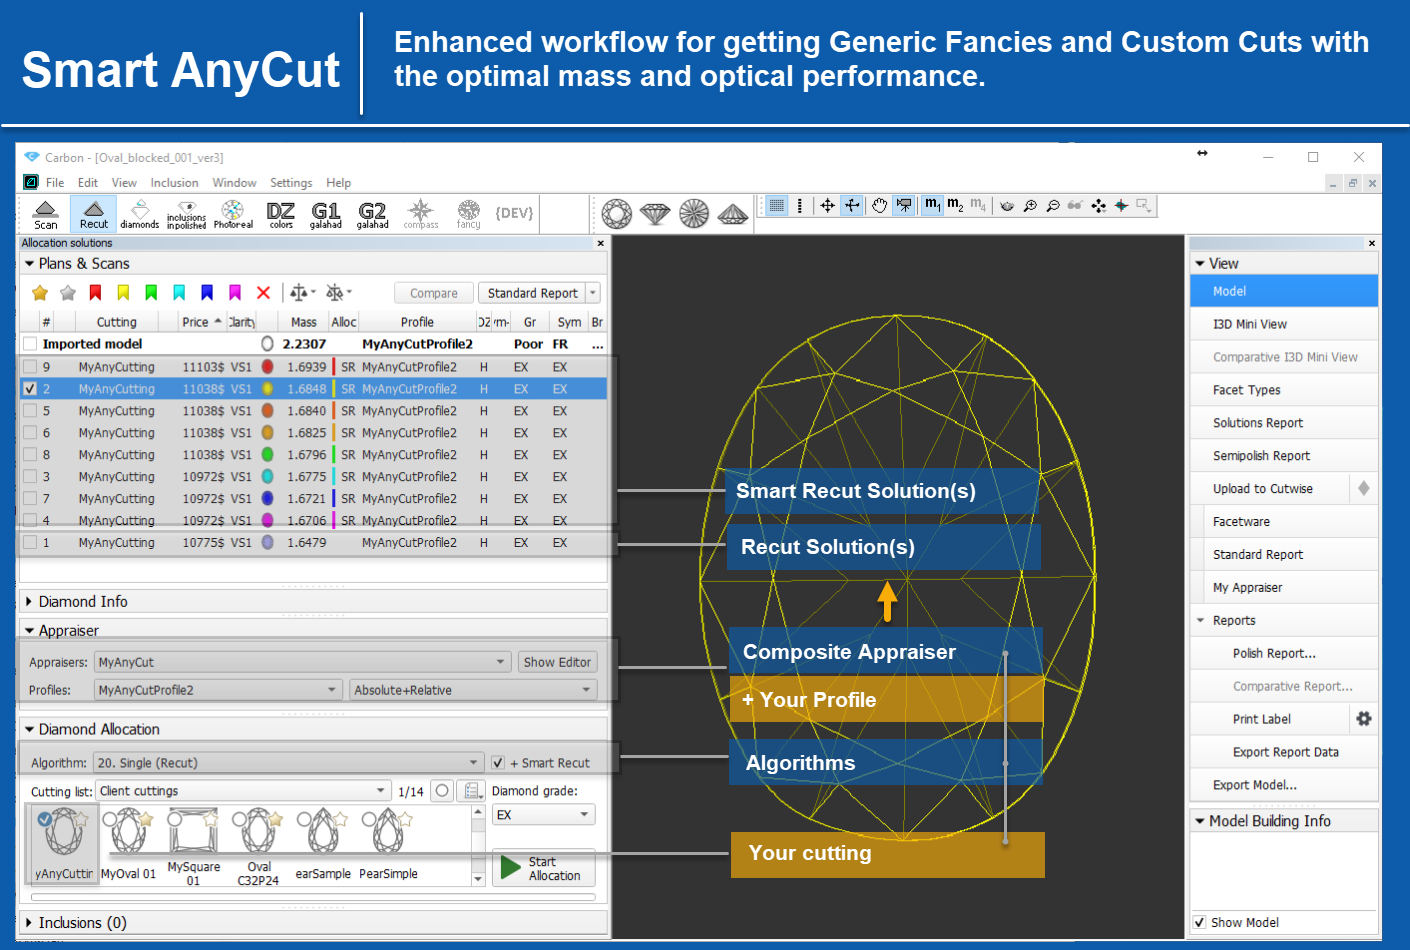 New Workflow - Smart AnyCut